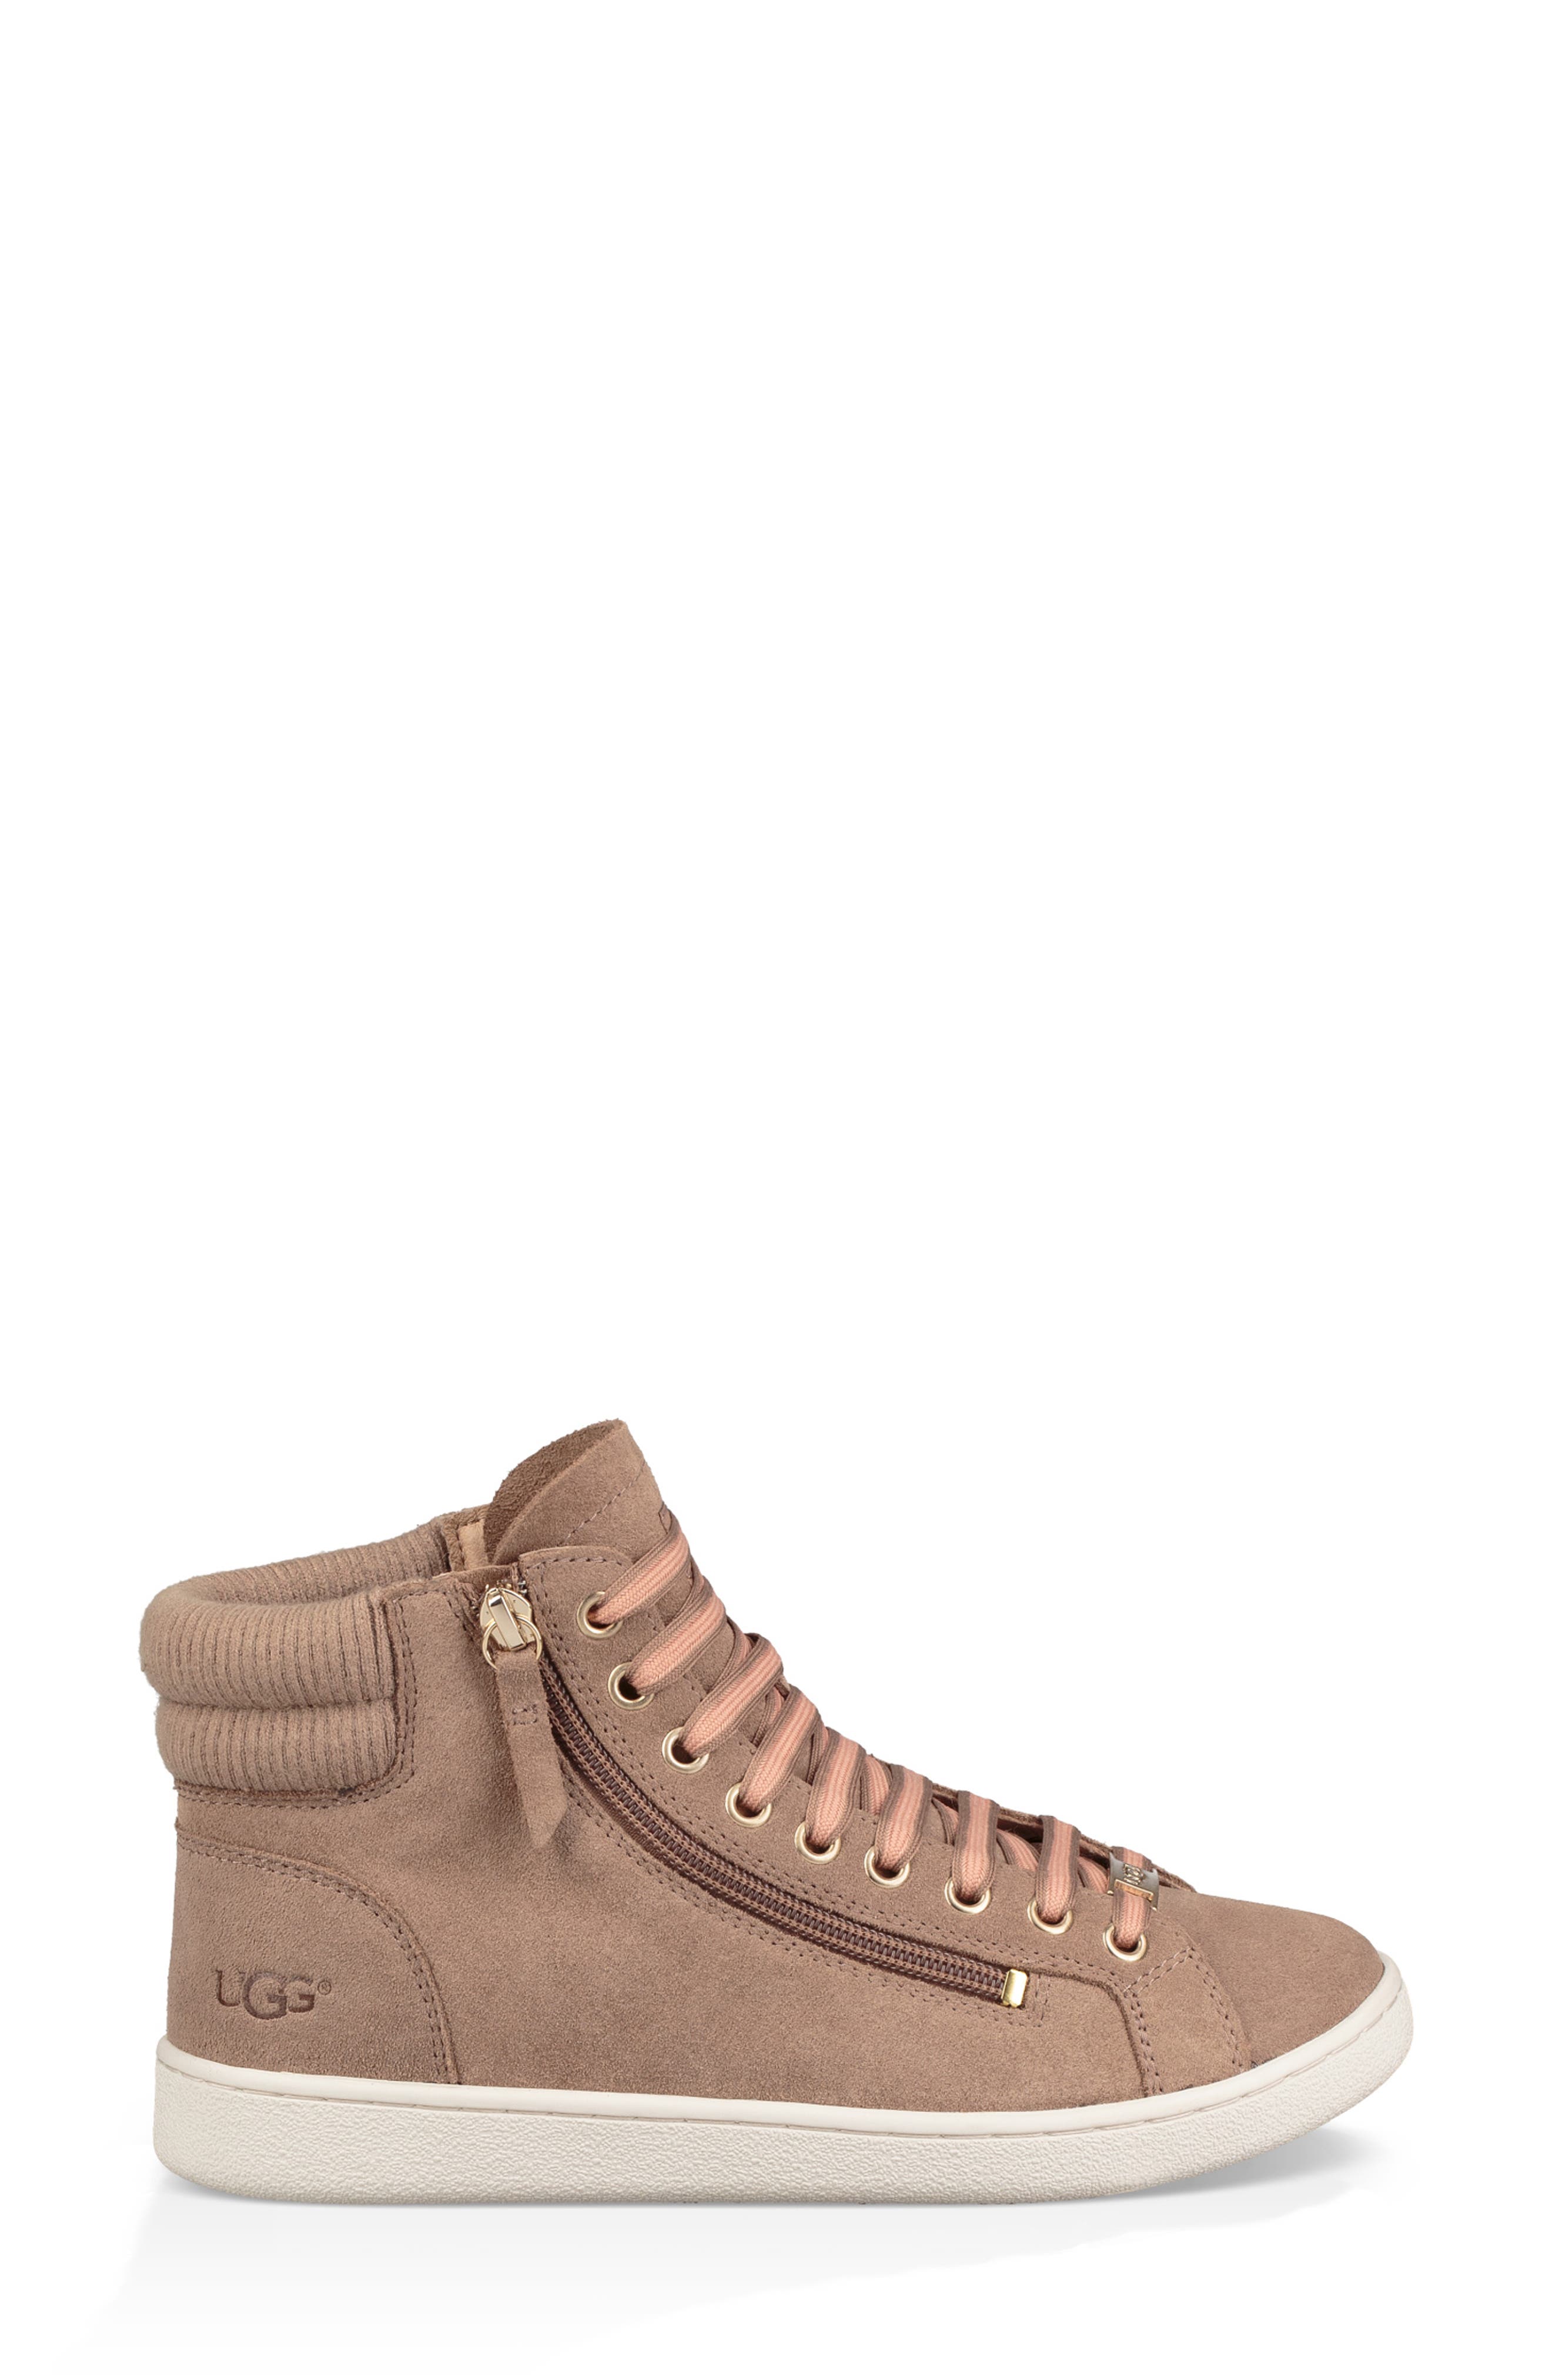 ugg high top sneakers olive